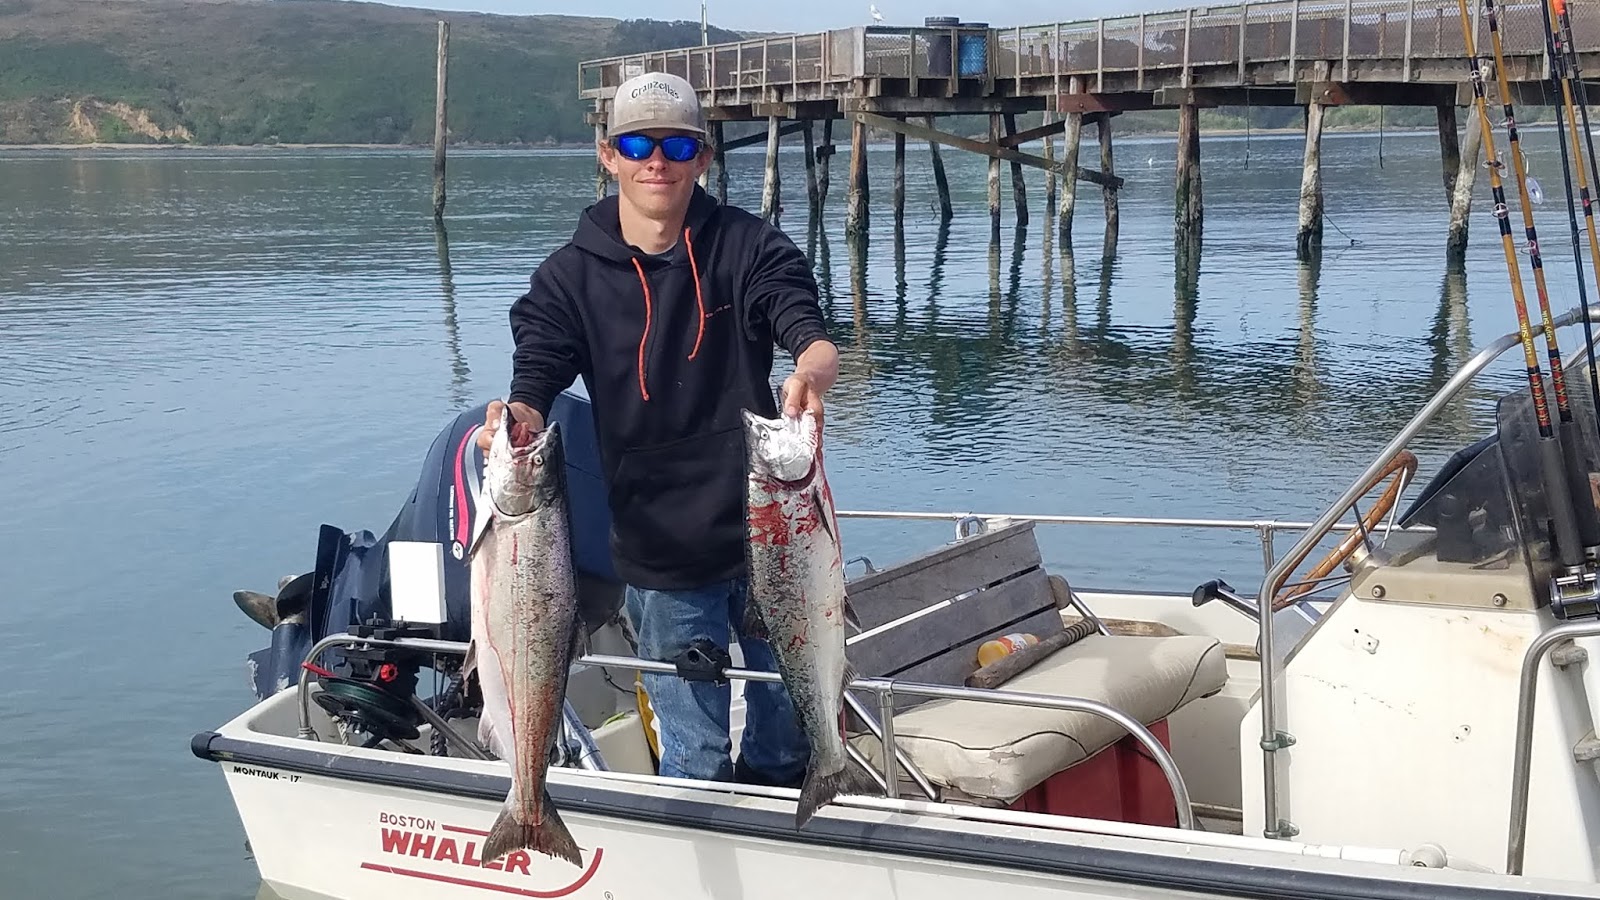 Salmon fishing from a Boston Whaler